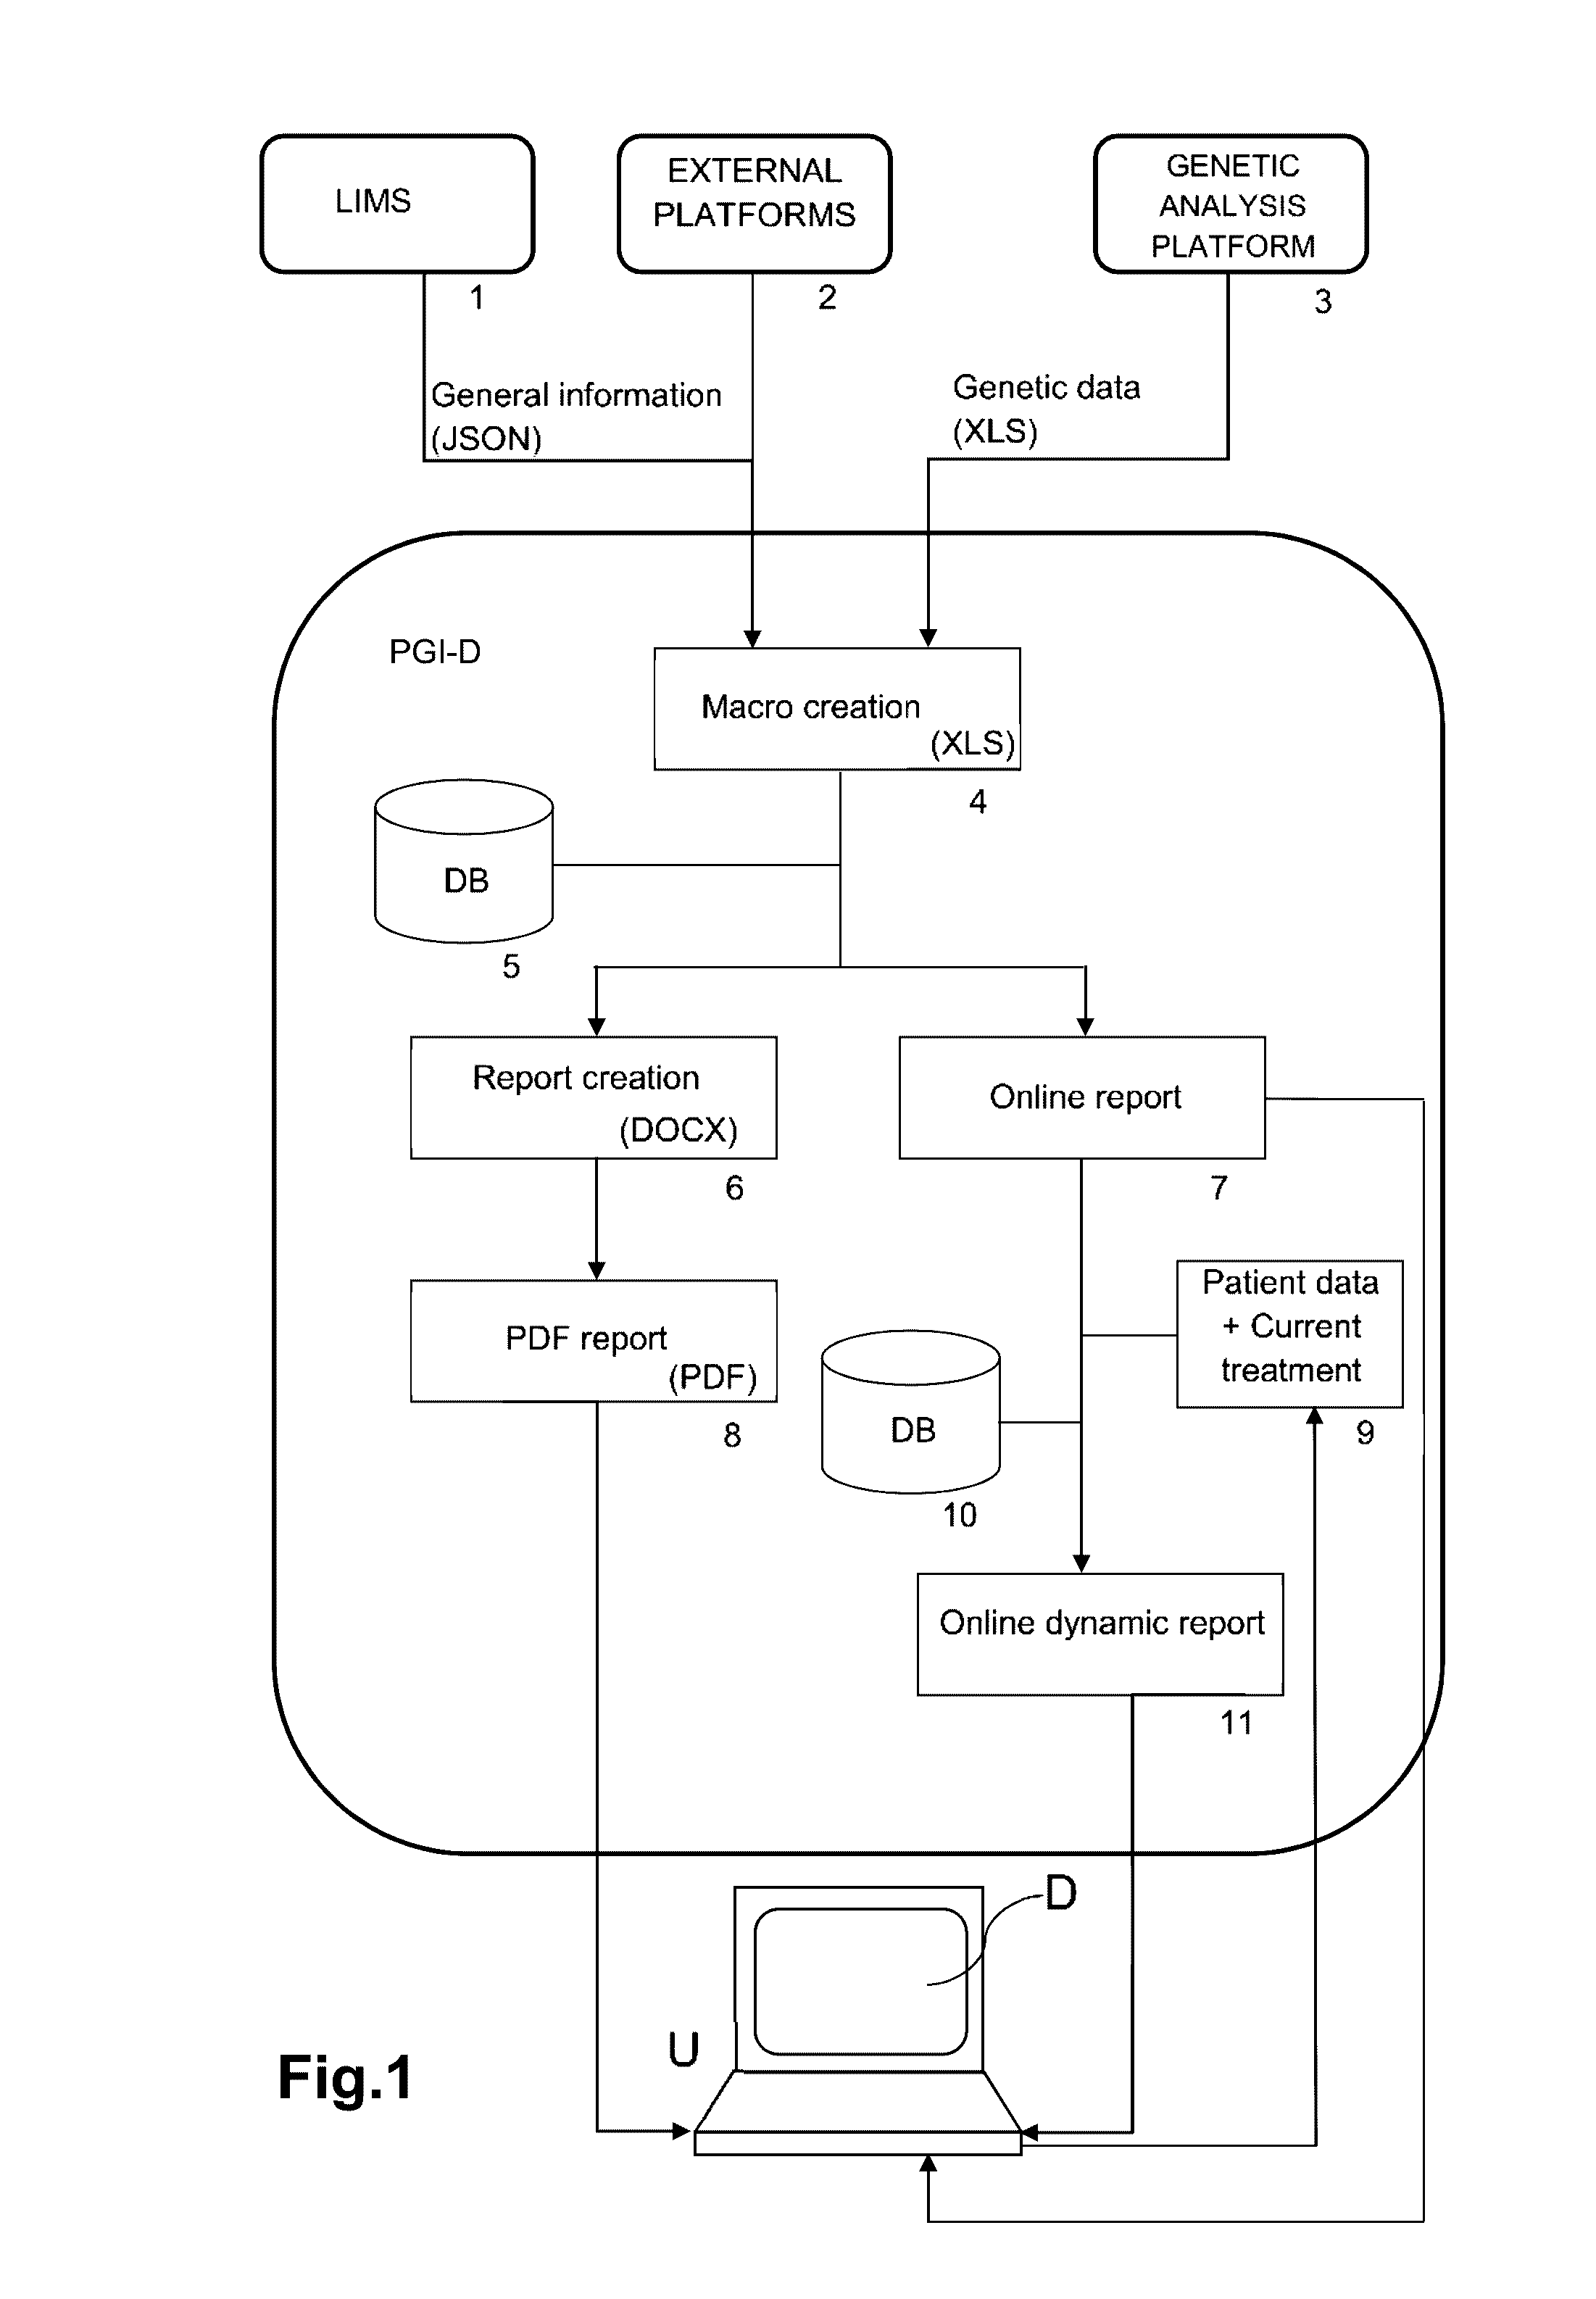 Web-based computer-aided method and system for providing personalized recommendations about drug use, and a computer-readable medium